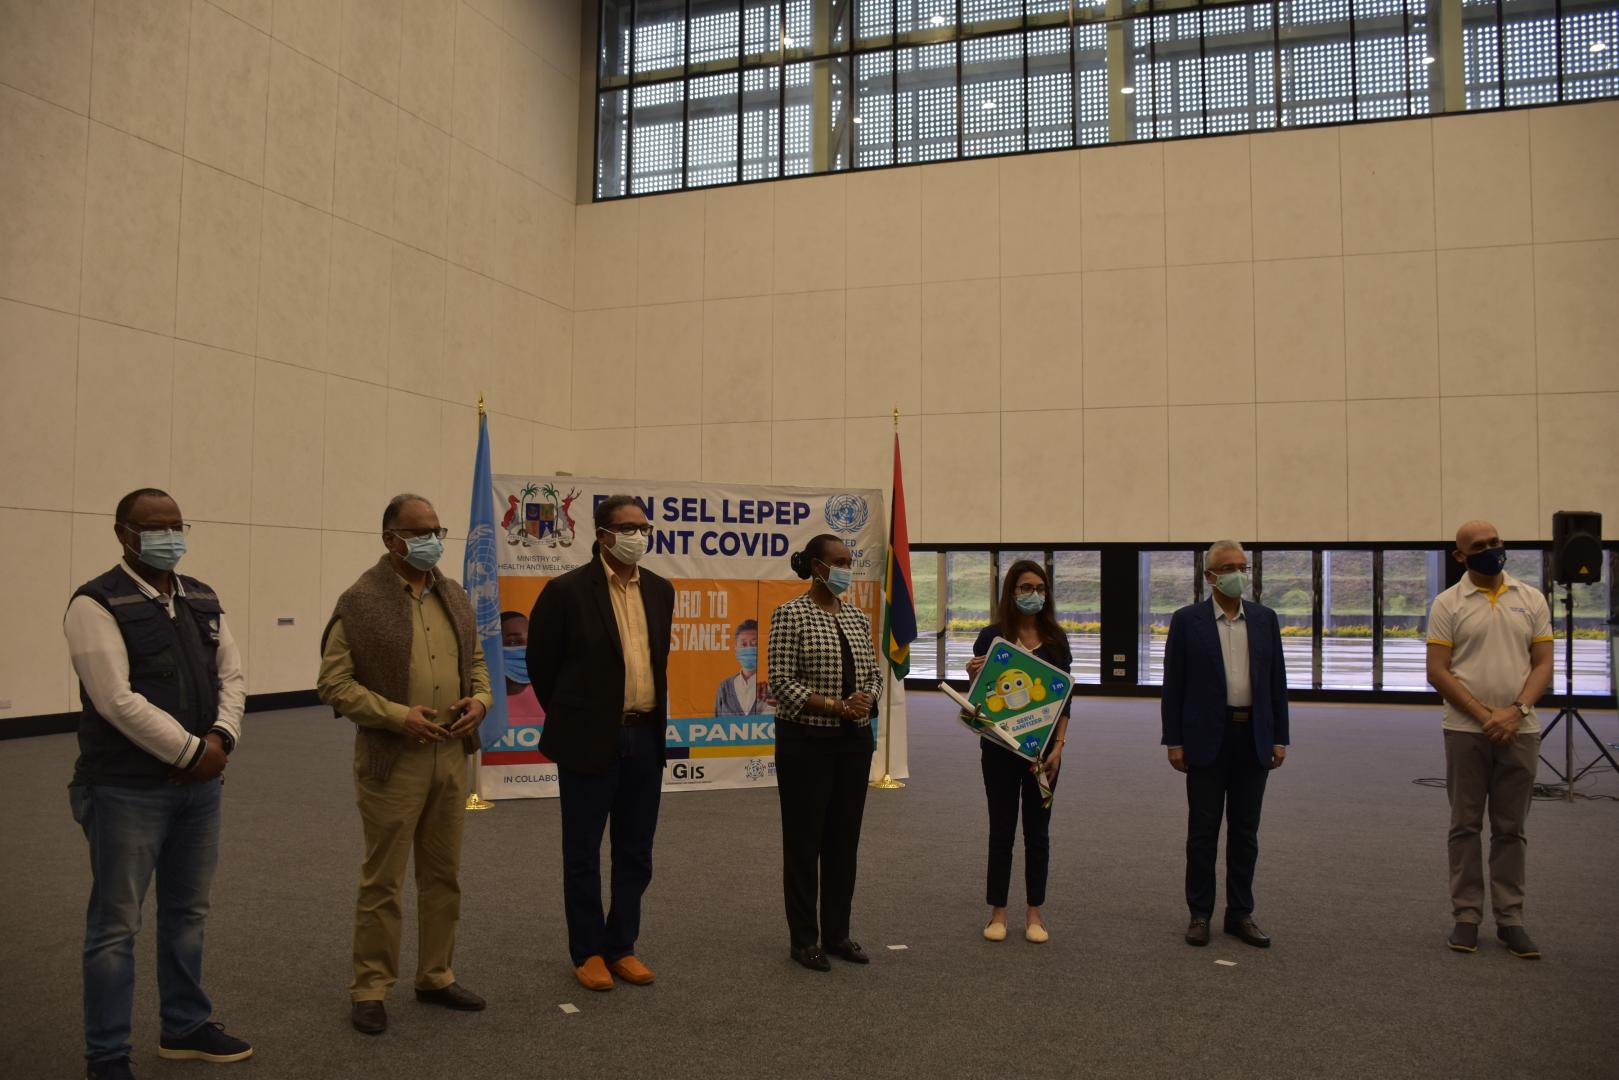 Launching of the national awareness campaign on COVID-19 on Sunday 23 May 2021 by the Prime Minister in the presence of the UN Resident Coordinator and the WHO Representative in Mauritius